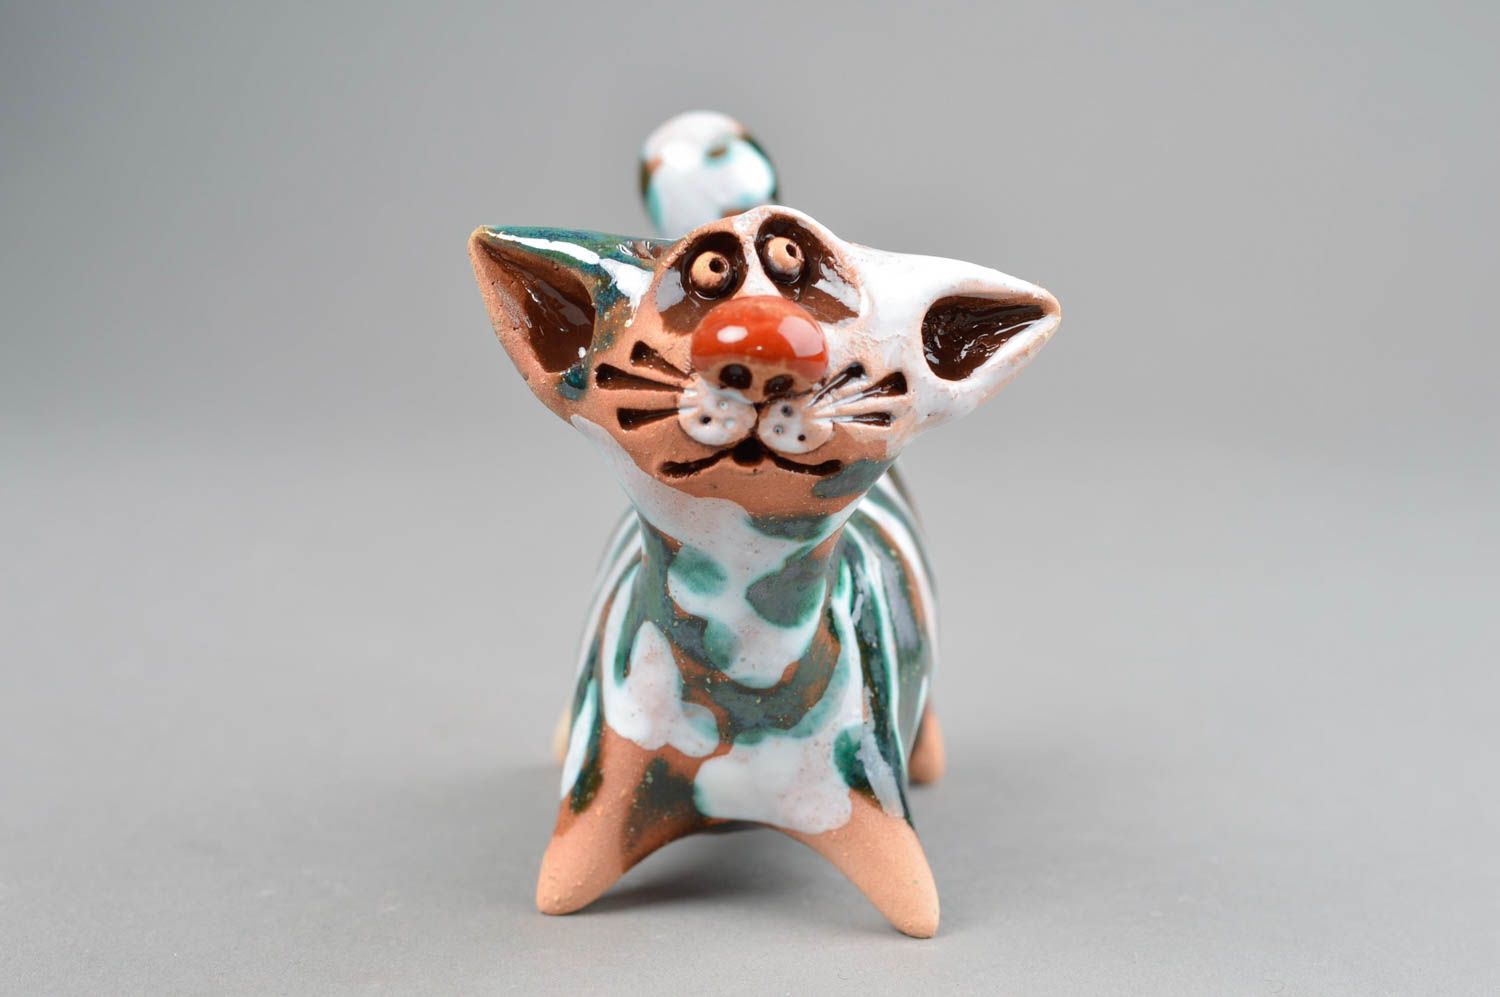 Homemade home decor ceramic figurine cat figurines gifts for cat lovers photo 3